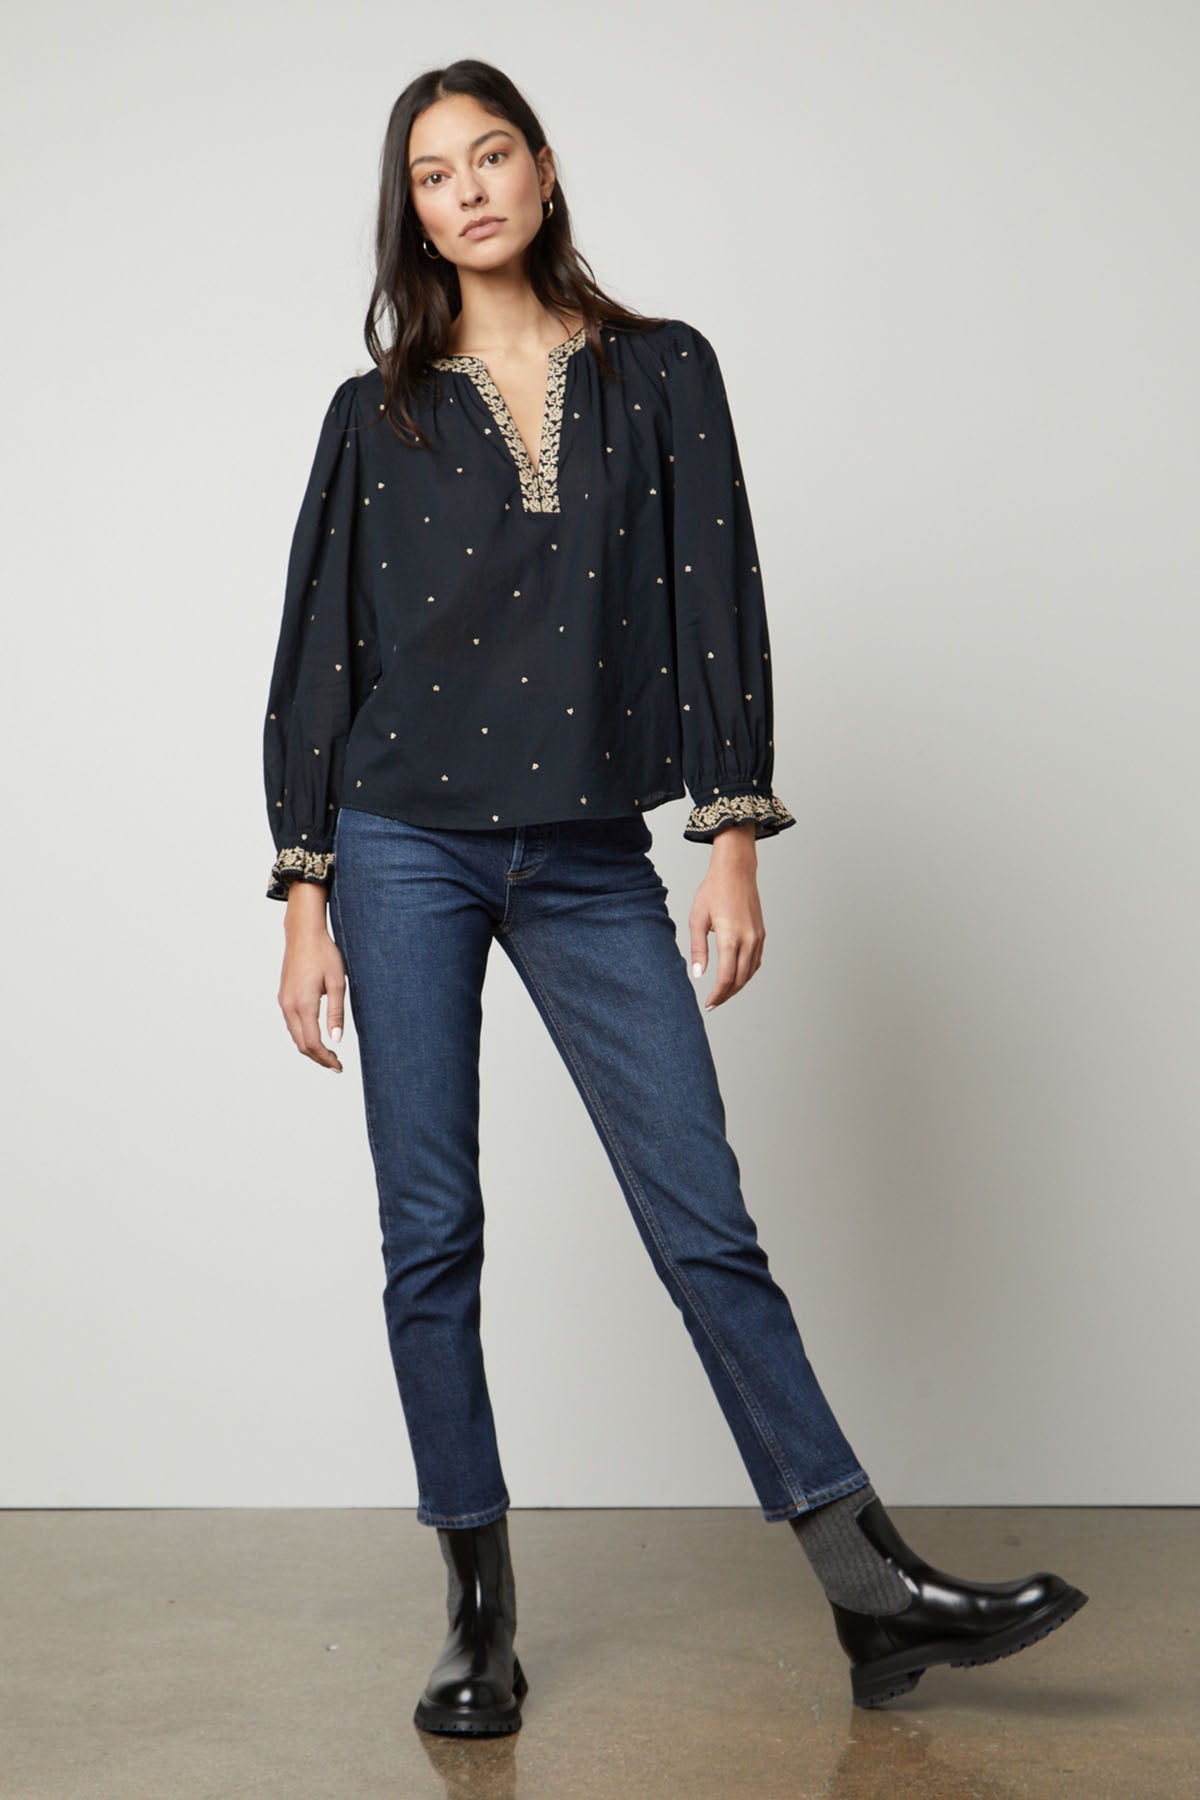 The model is wearing jeans and a black Velvet by Graham & Spencer ANIA EMBROIDERED BOHO TOP.-26727642431681